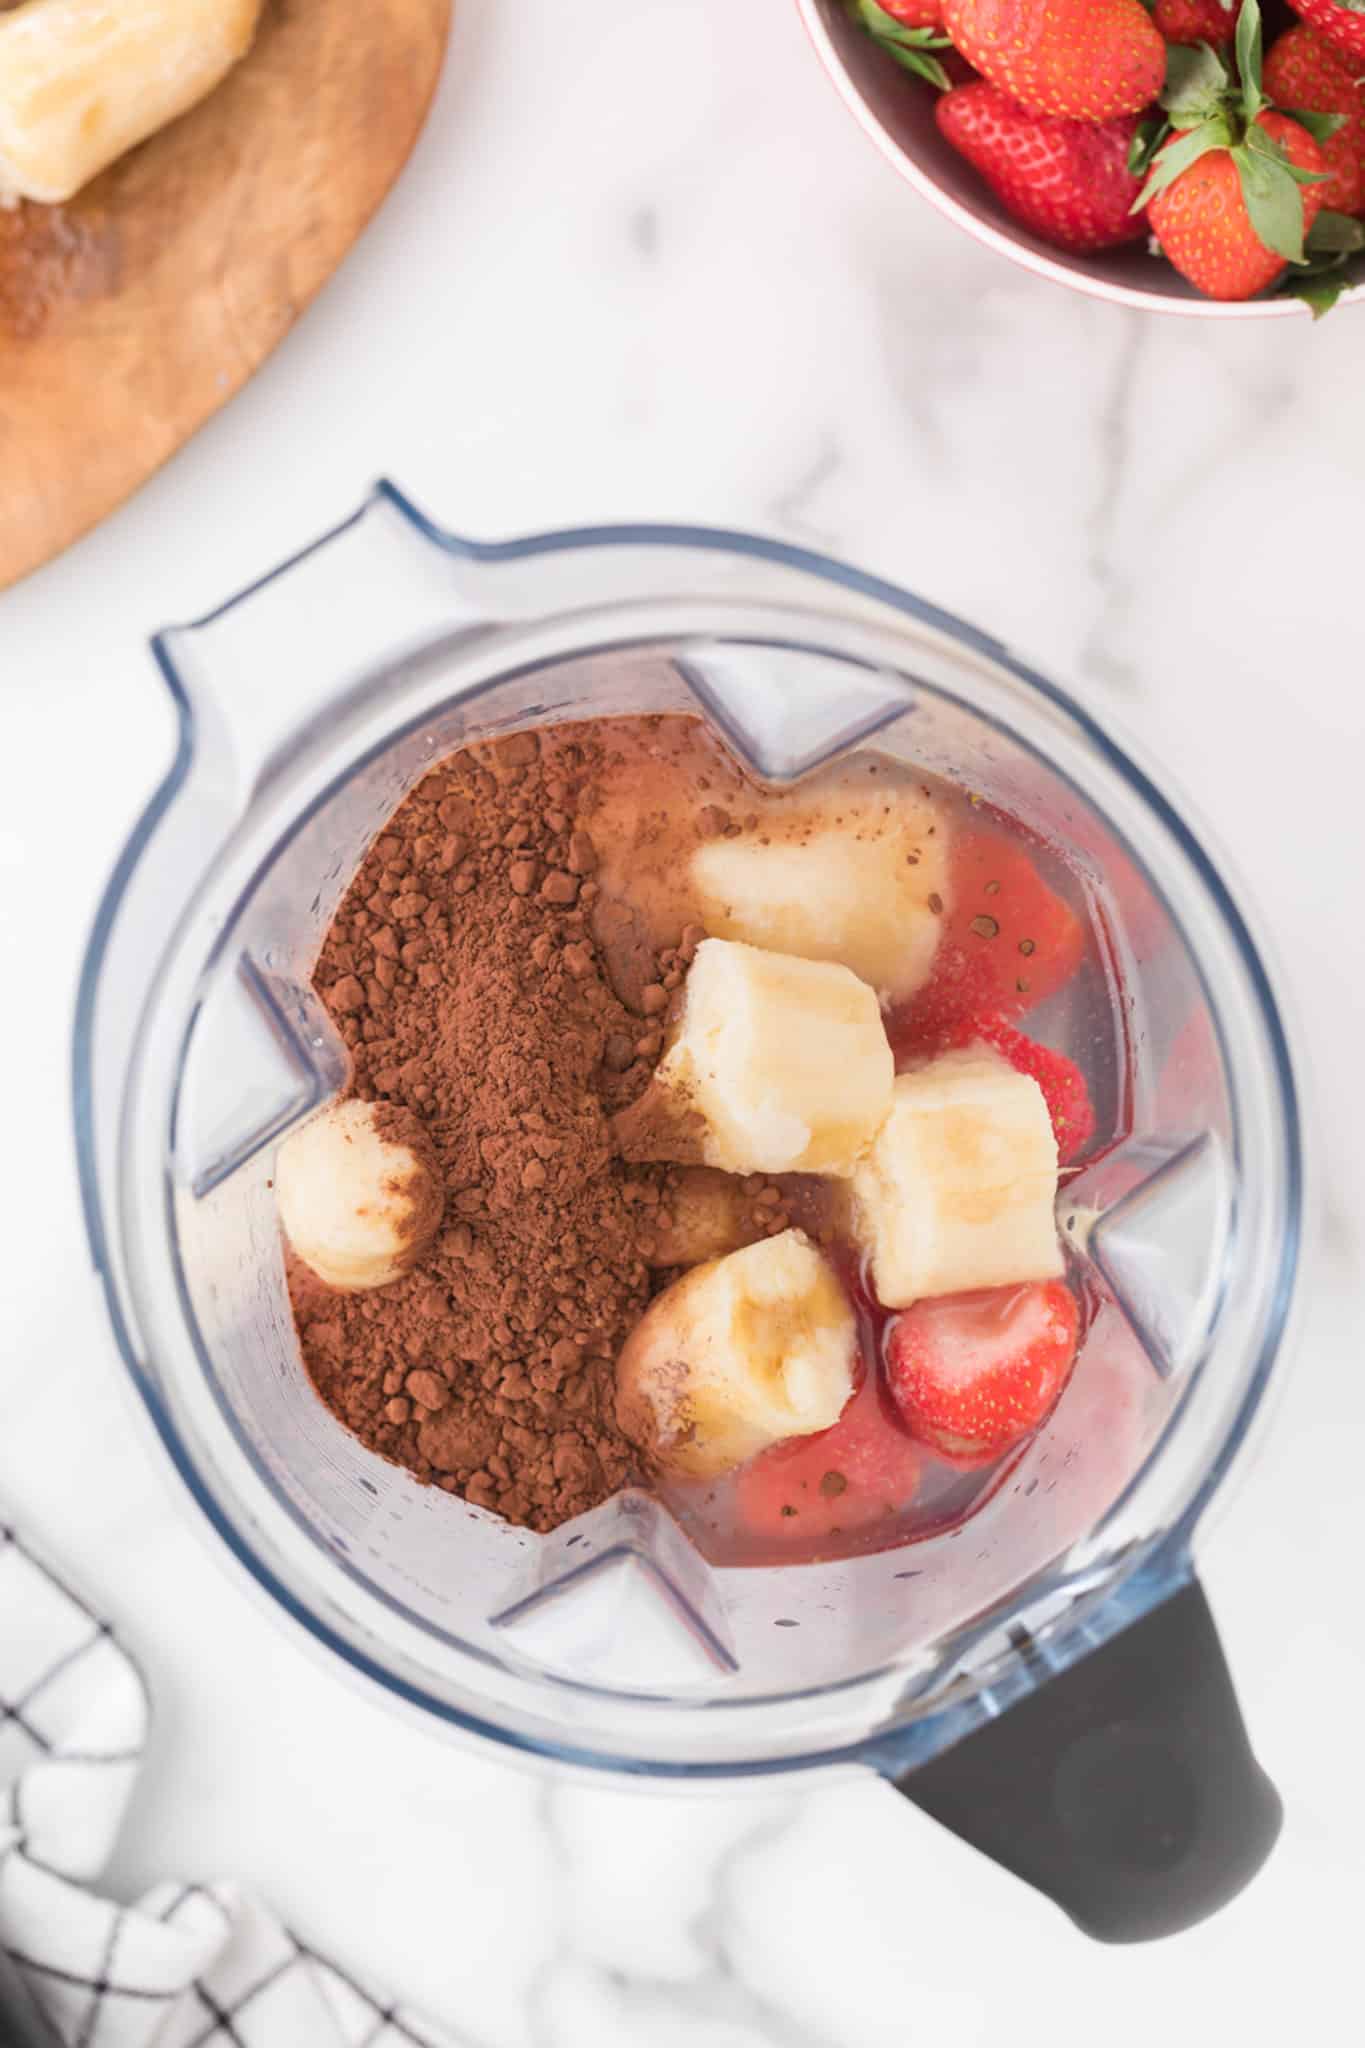 ingredients in blender for chocolate banana smoothie.